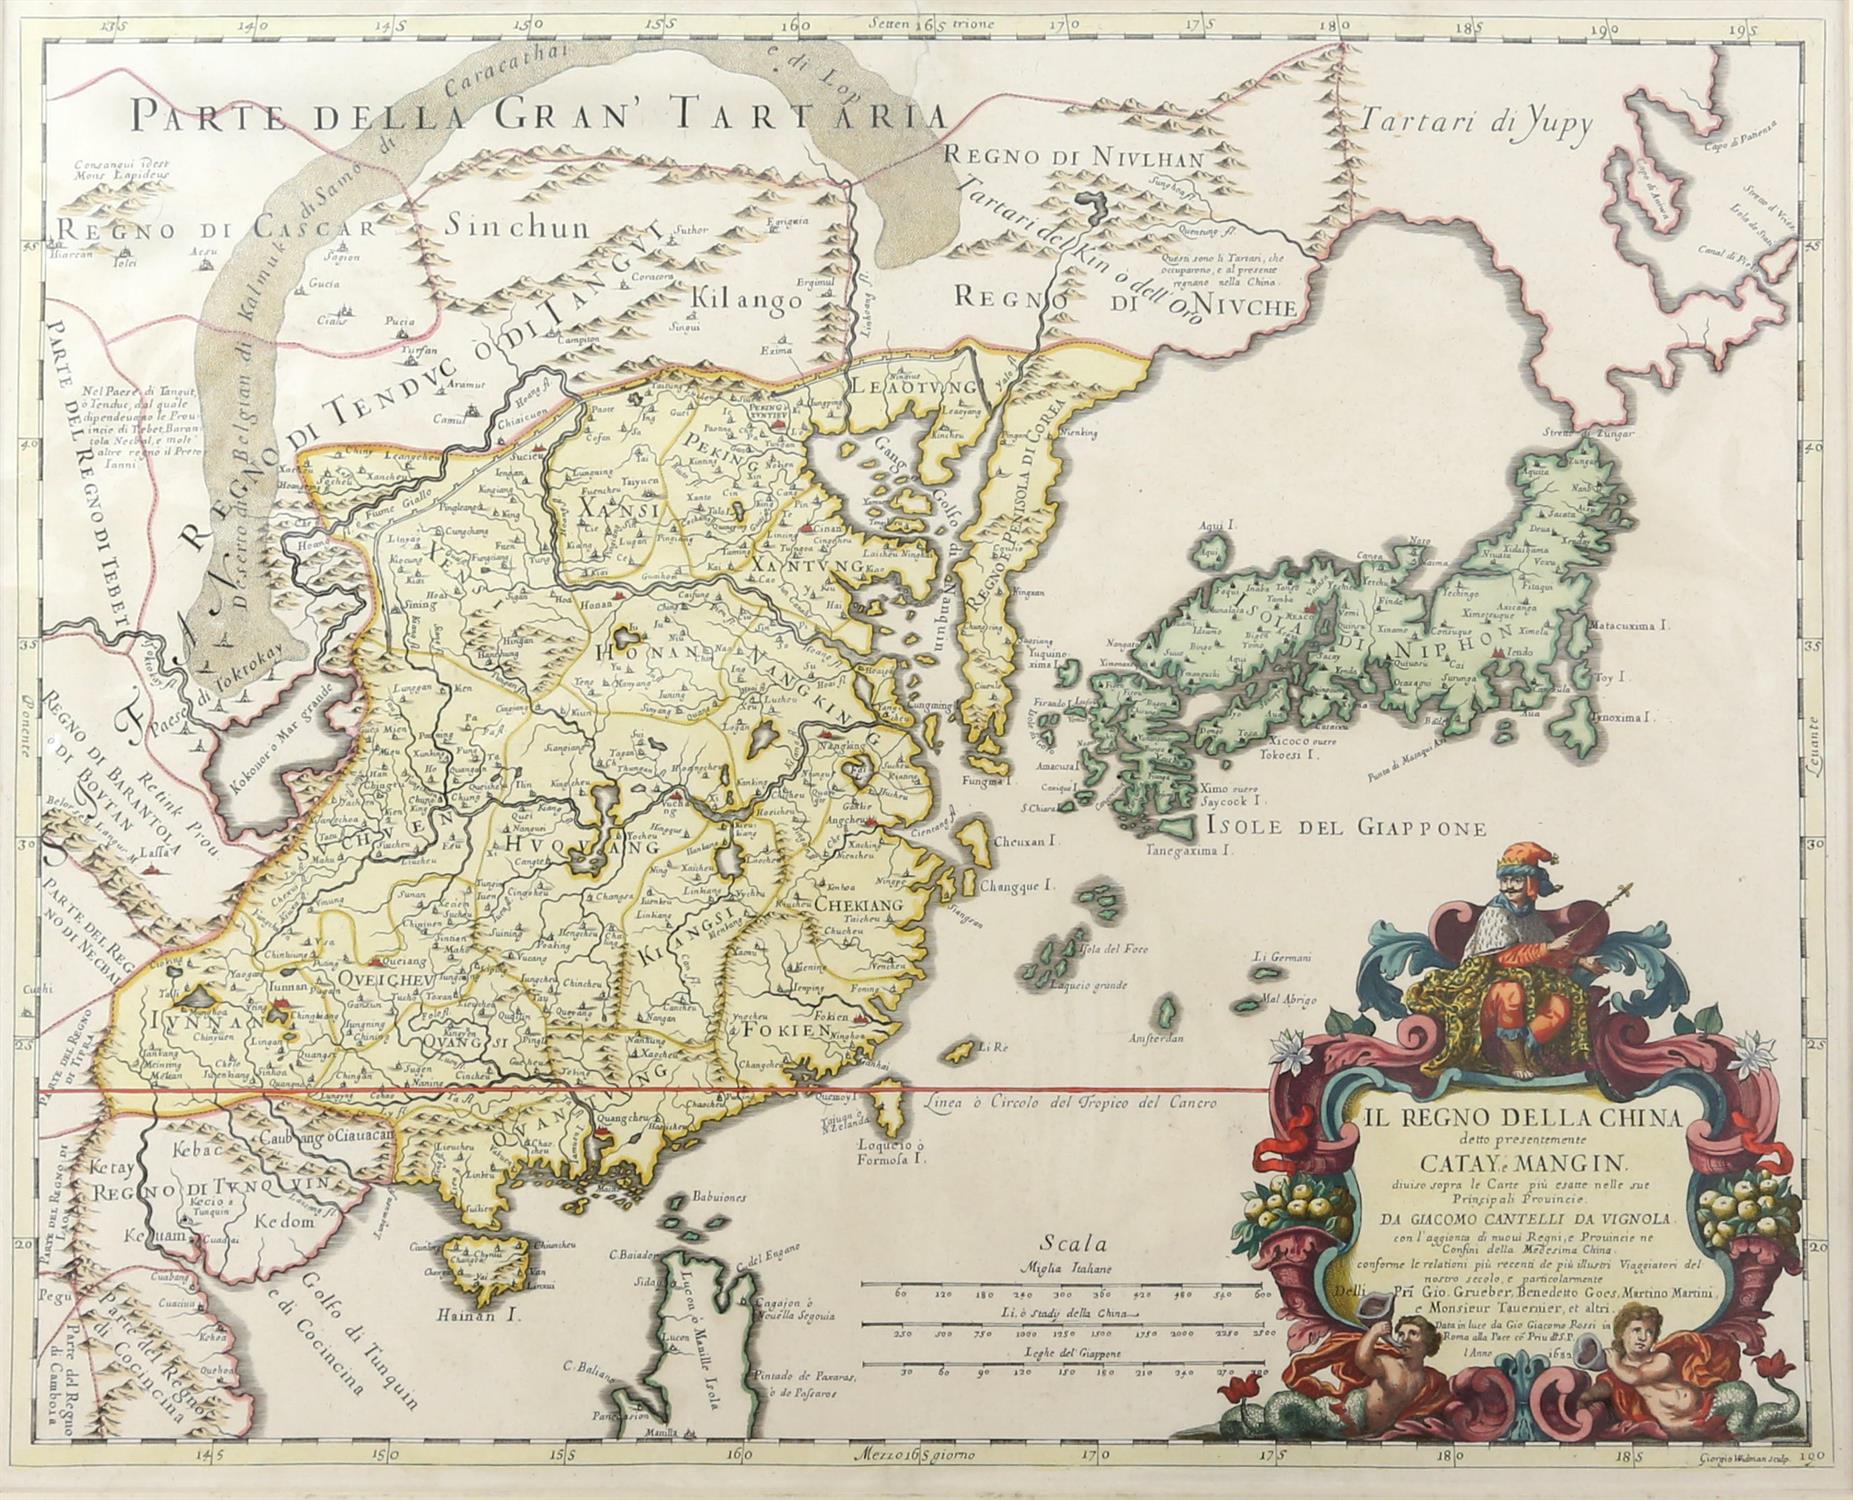 17th century map of China and Japan by Giacomo Rossi, scrolled cartouche surmounted by The Great